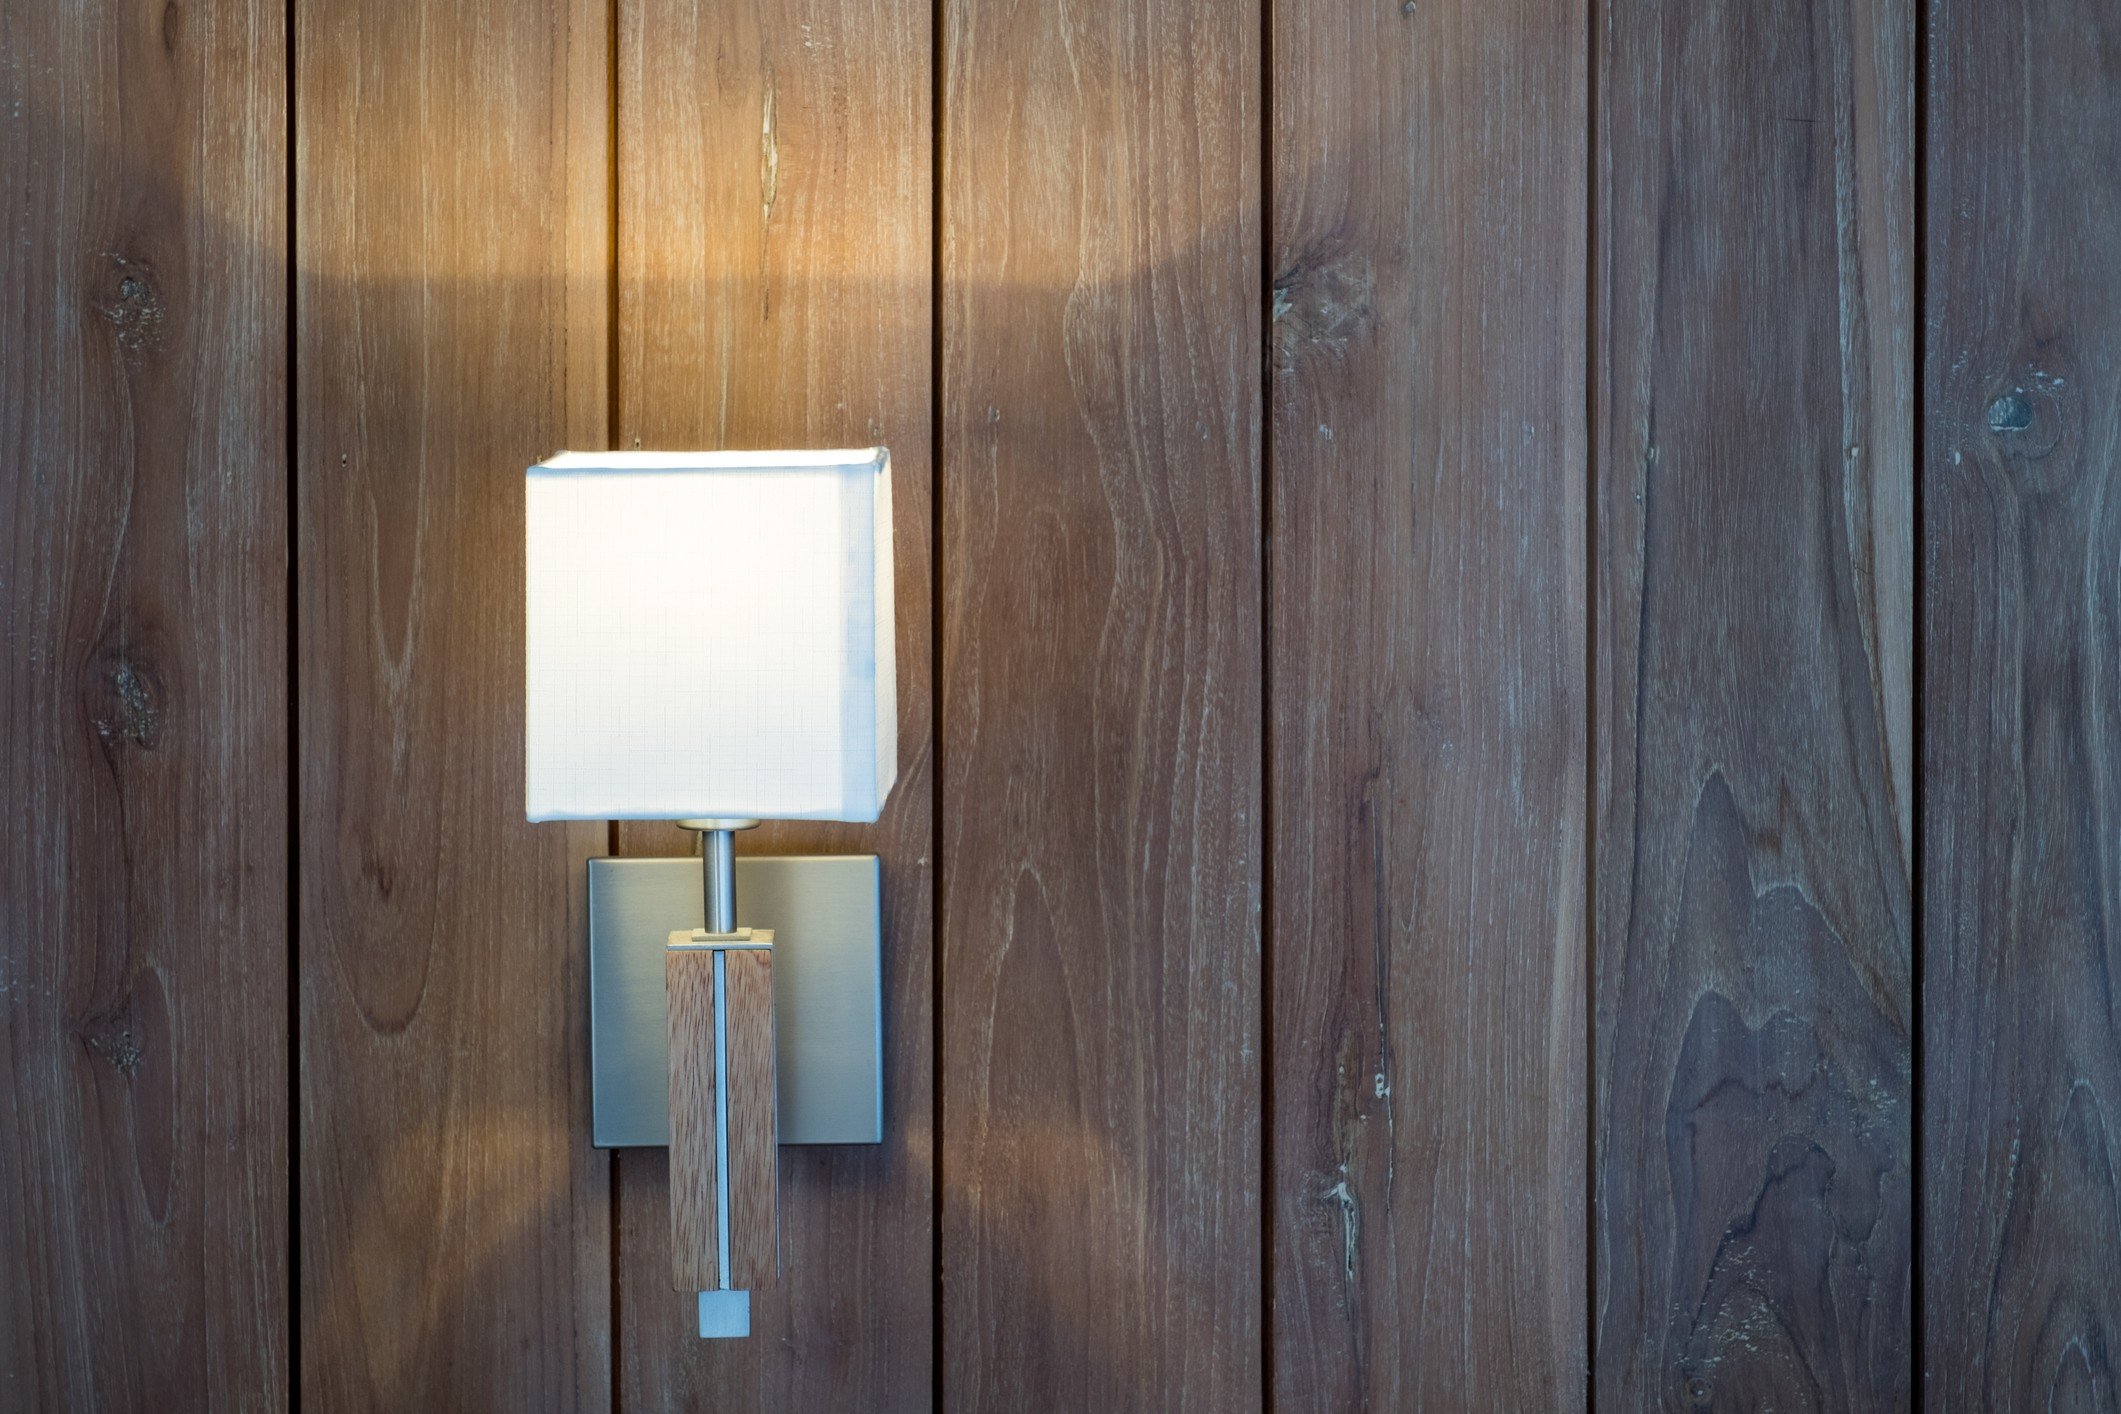 Square wall light on brown wood paneling